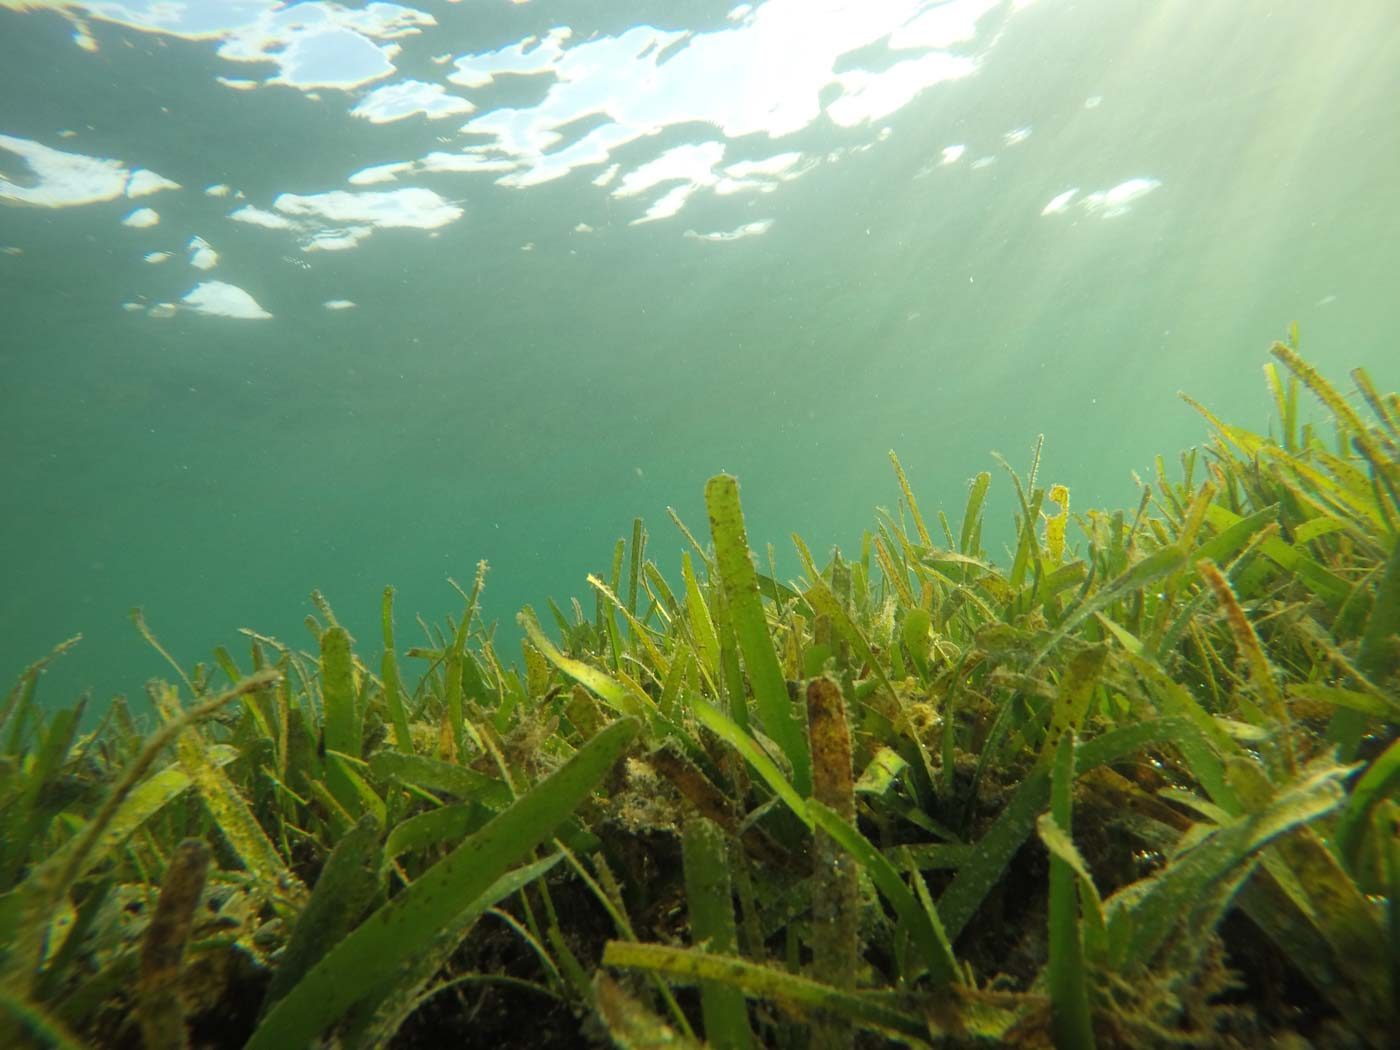 Seagrass meadows support food security in Guimaras – research